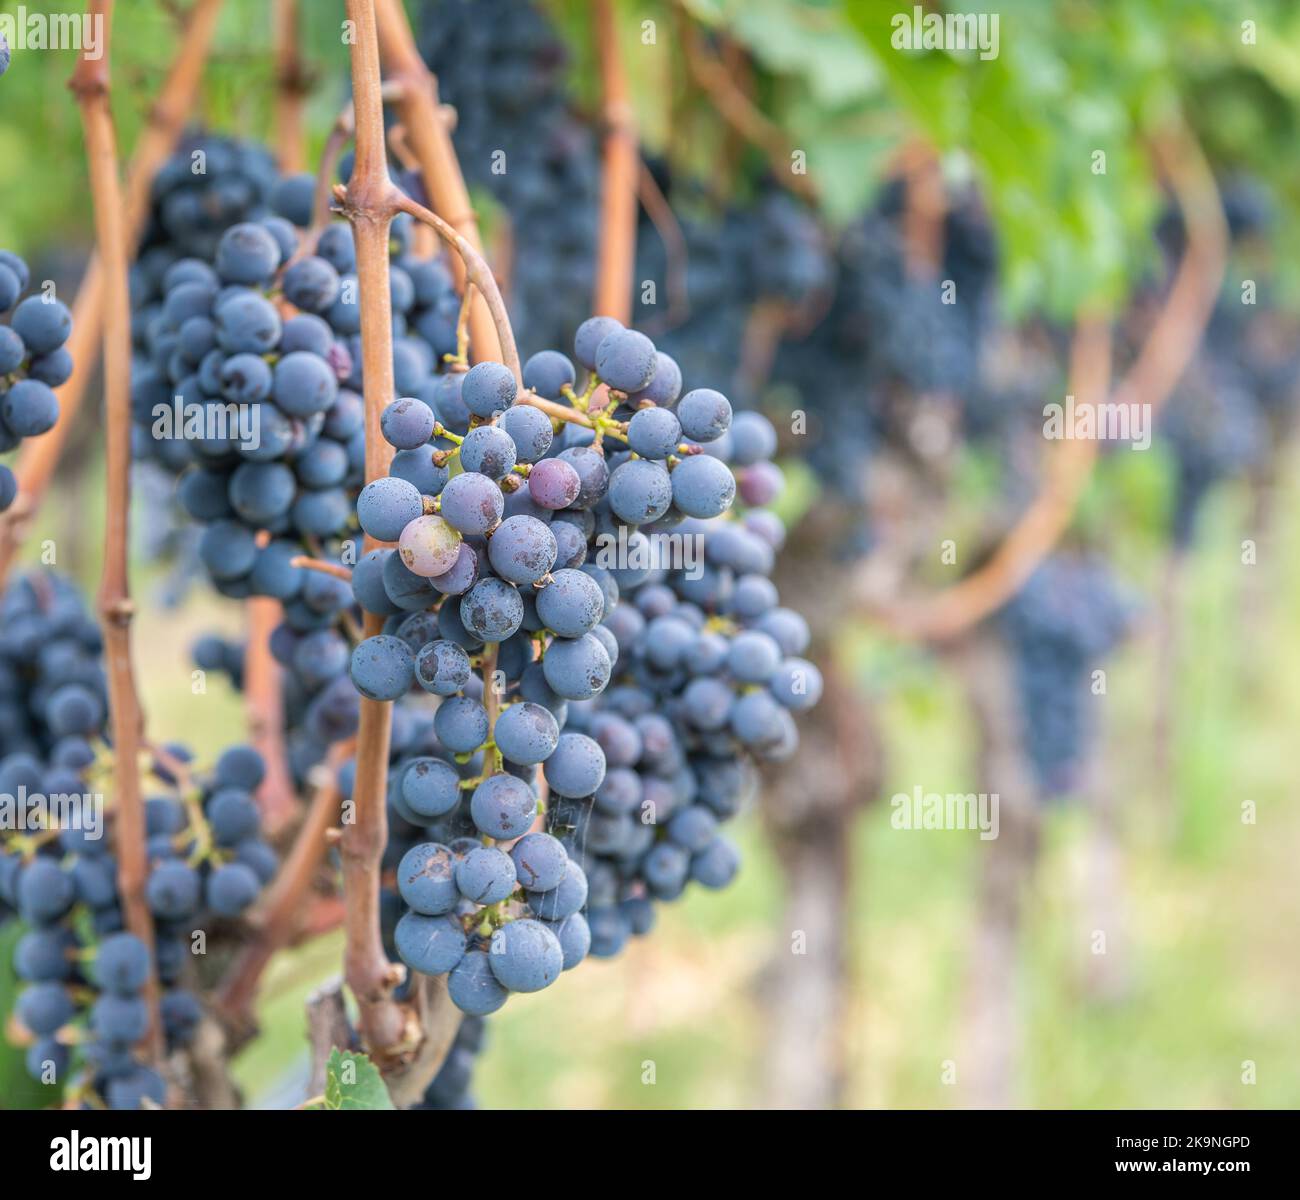 Lagrein grape variety. Lagrein is a red wine grape variety native to the valleys of South Tyrol, northern italy. Guyot Vine Training System - Italy Stock Photo